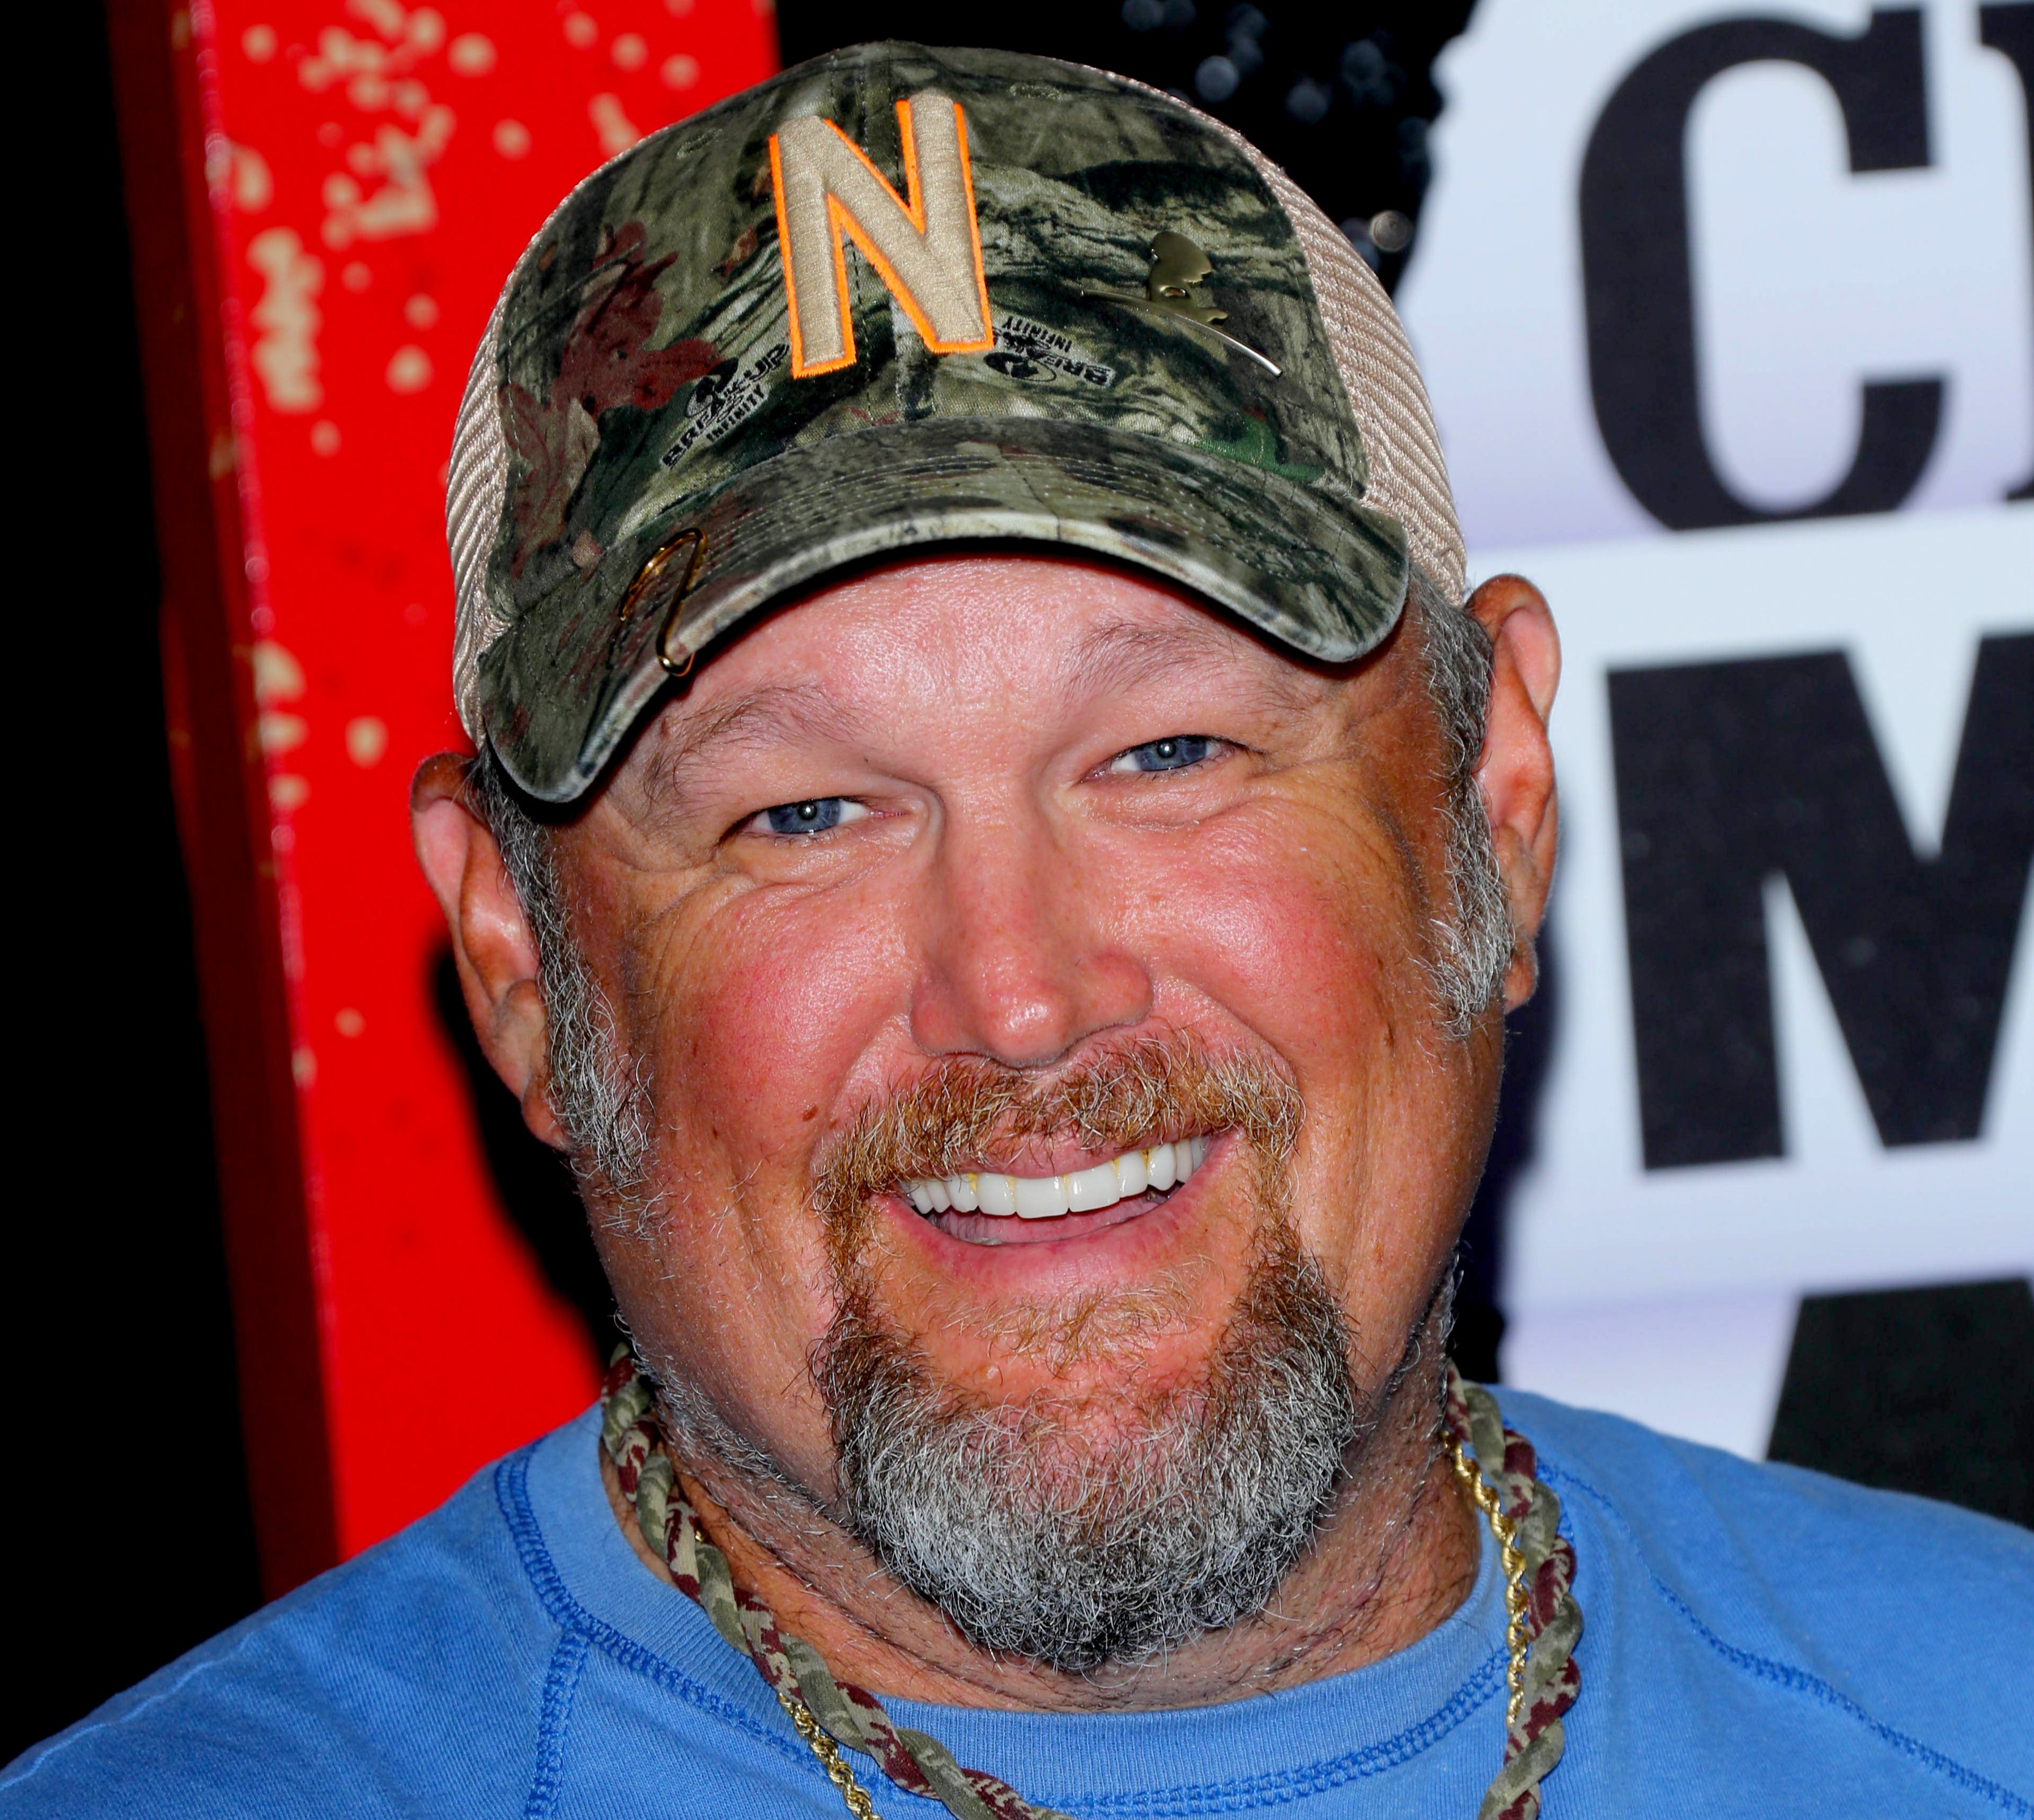 Where Does Larry The Cable Guy Currently Live Larry the Cable Guy shames tone-deaf celebs singing “Imagine,” while